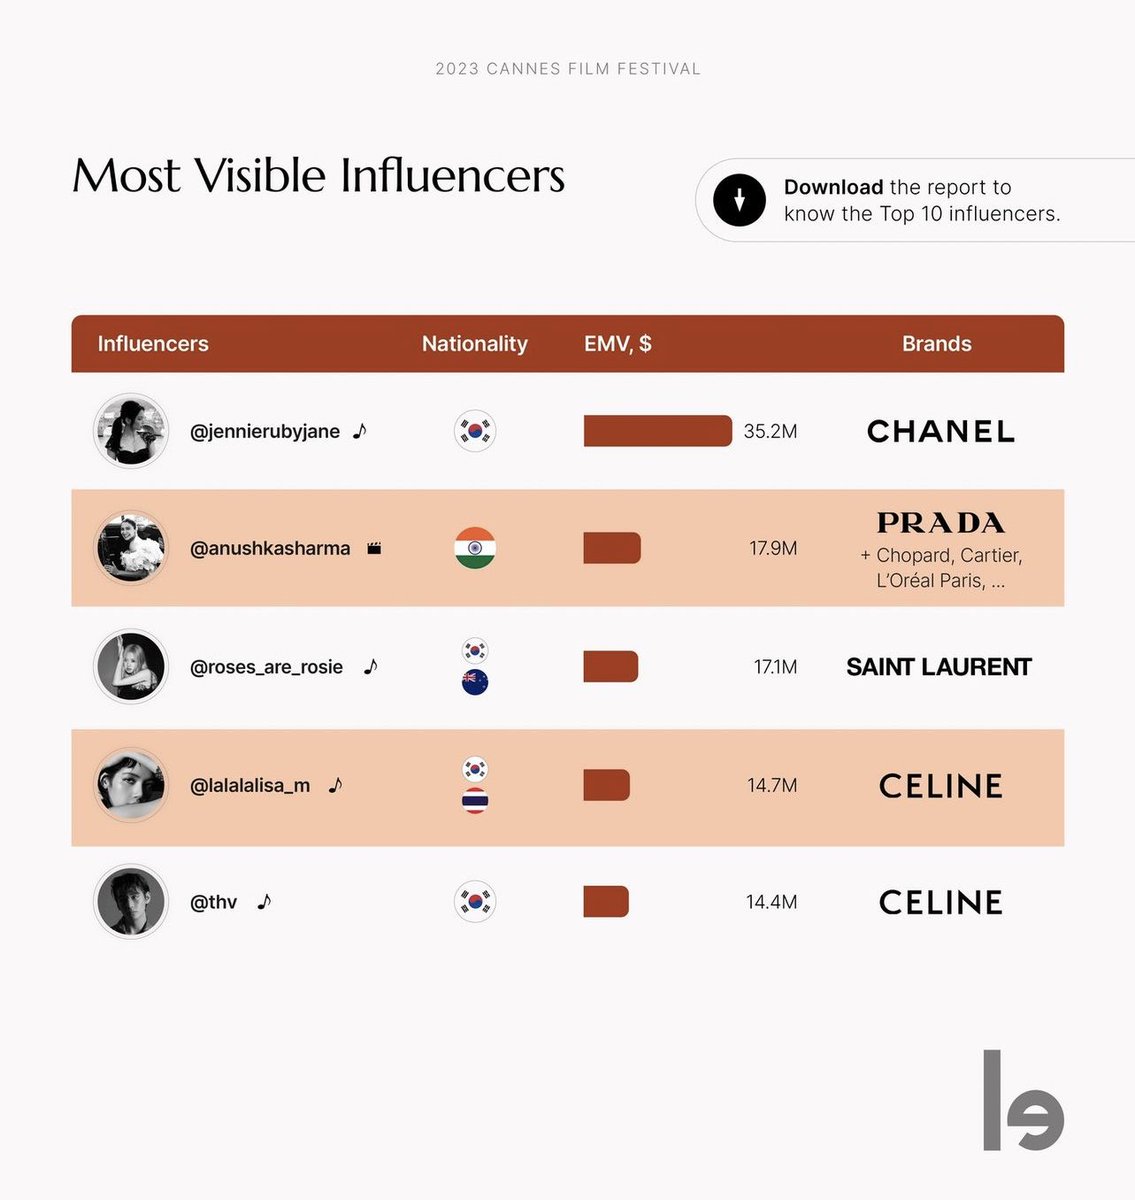 According to LEFTY, Kim Taehyung is one of the Most Visible Influencers during Cannes Film Festival with an EMV of $14.4M from 1 Instagram post.